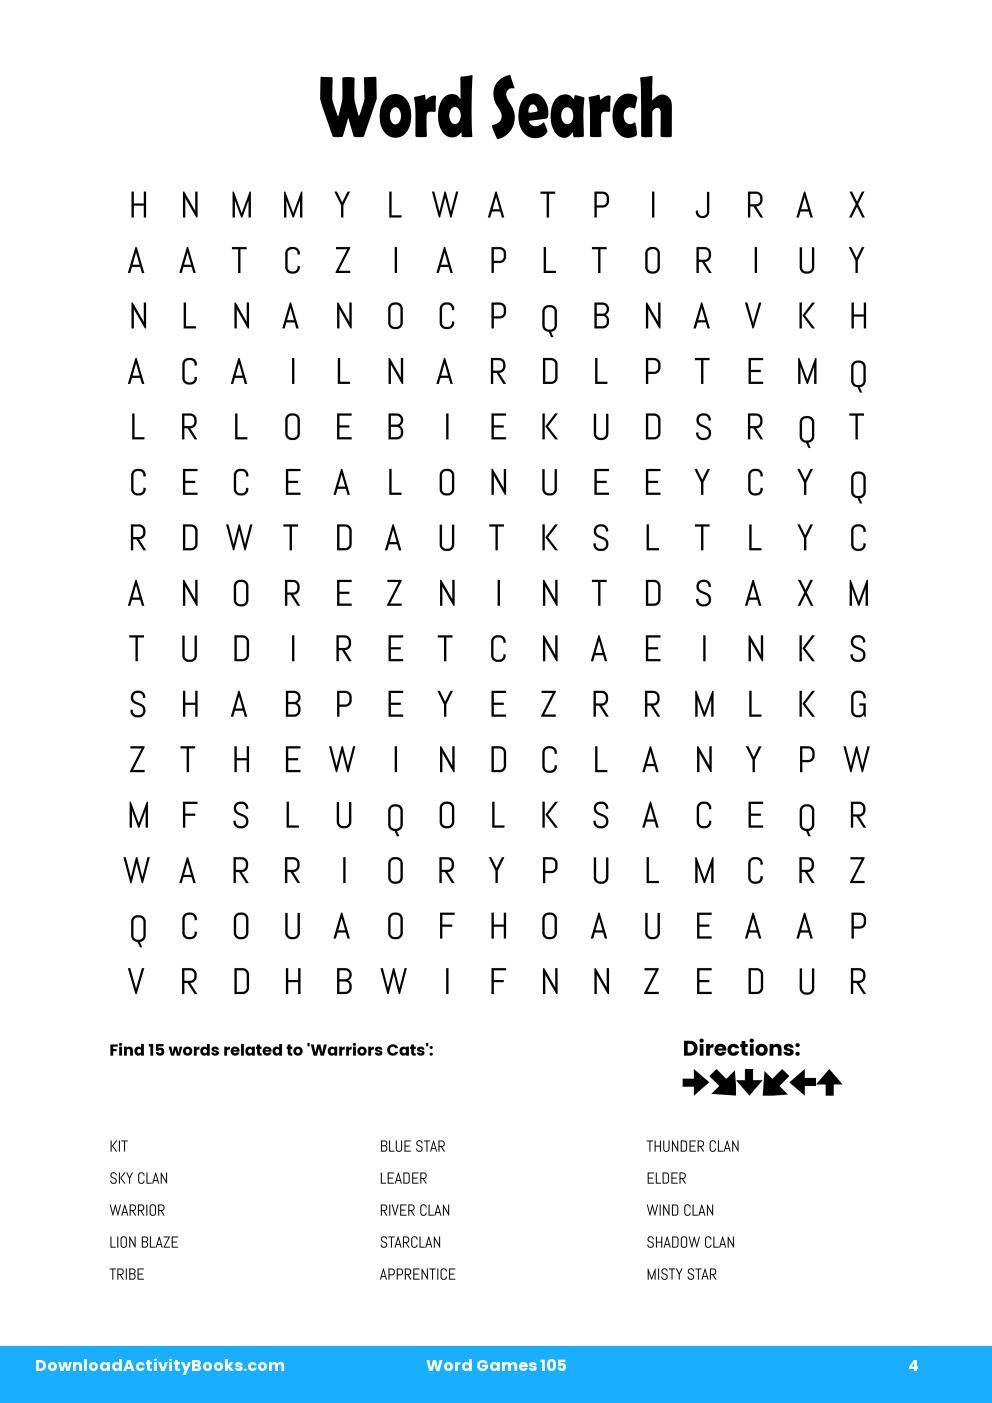 Word Search in Word Games 105